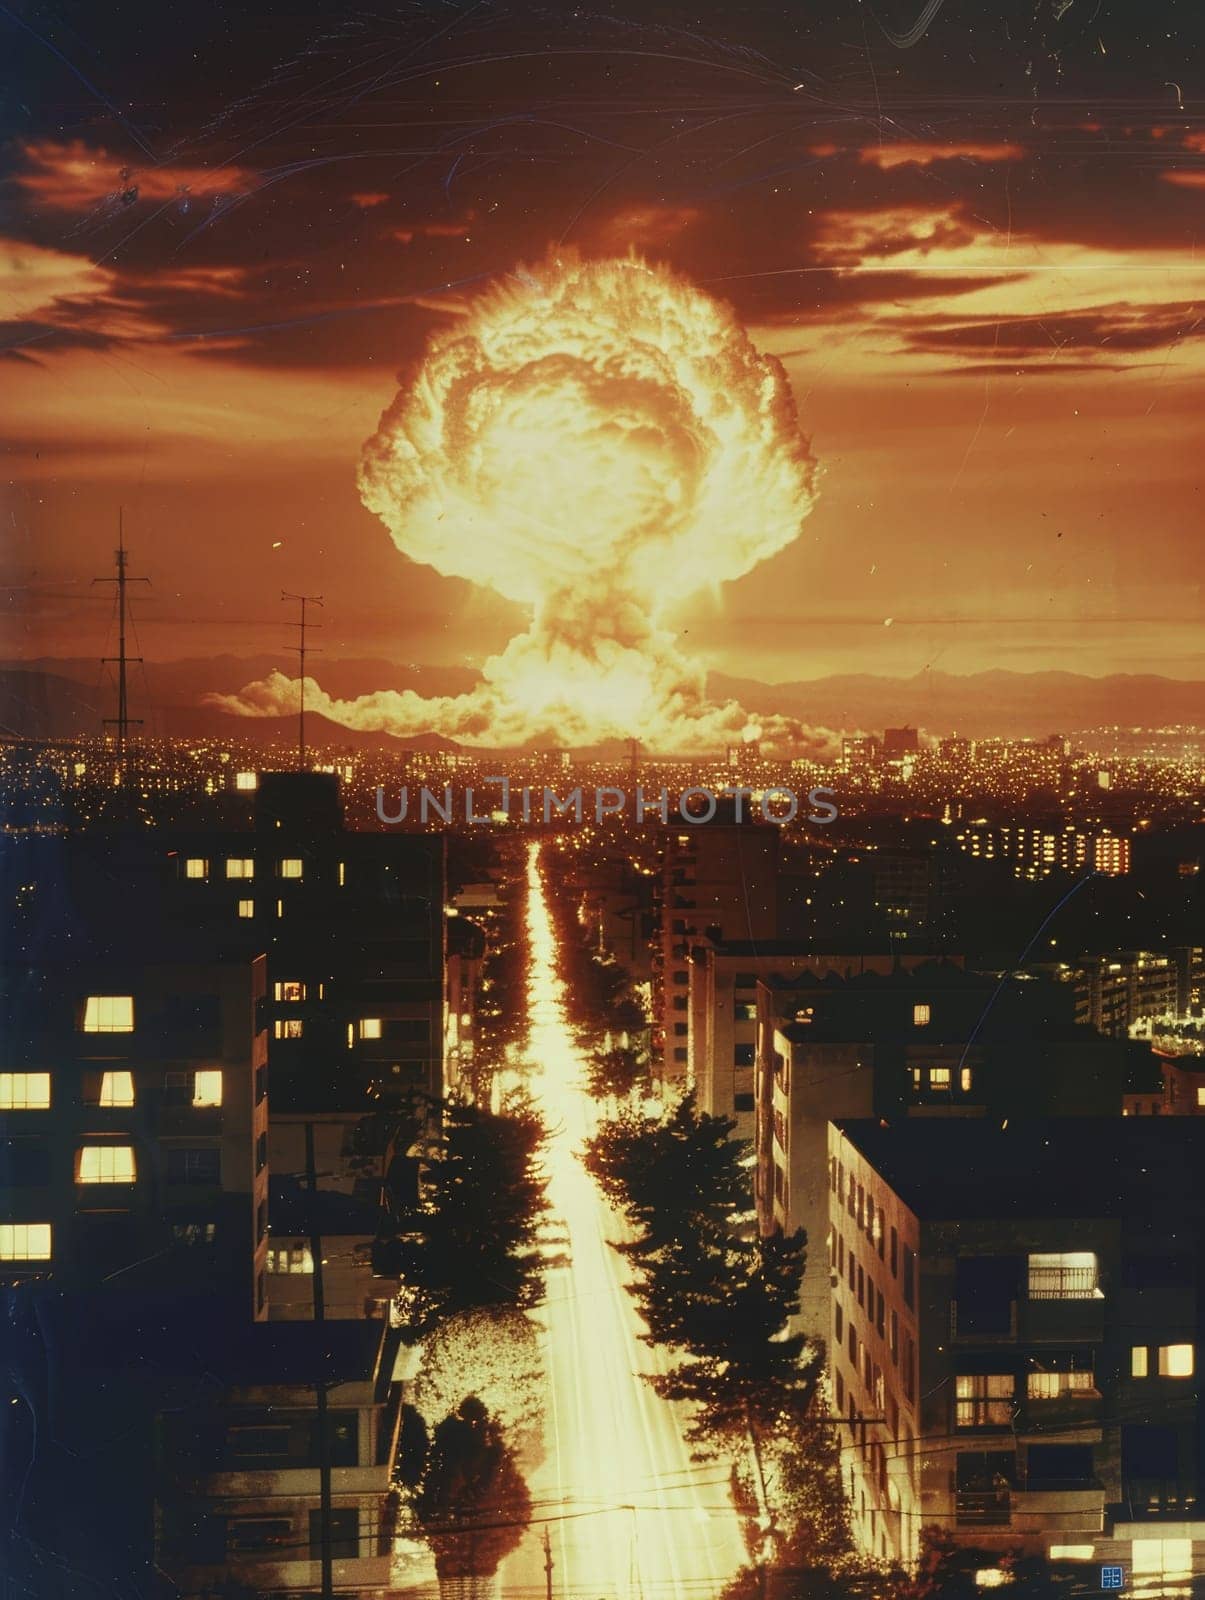 A retro-style image depicts an intense explosion over a cityscape at night, creating an atmosphere of science fiction and historical drama.. by sfinks